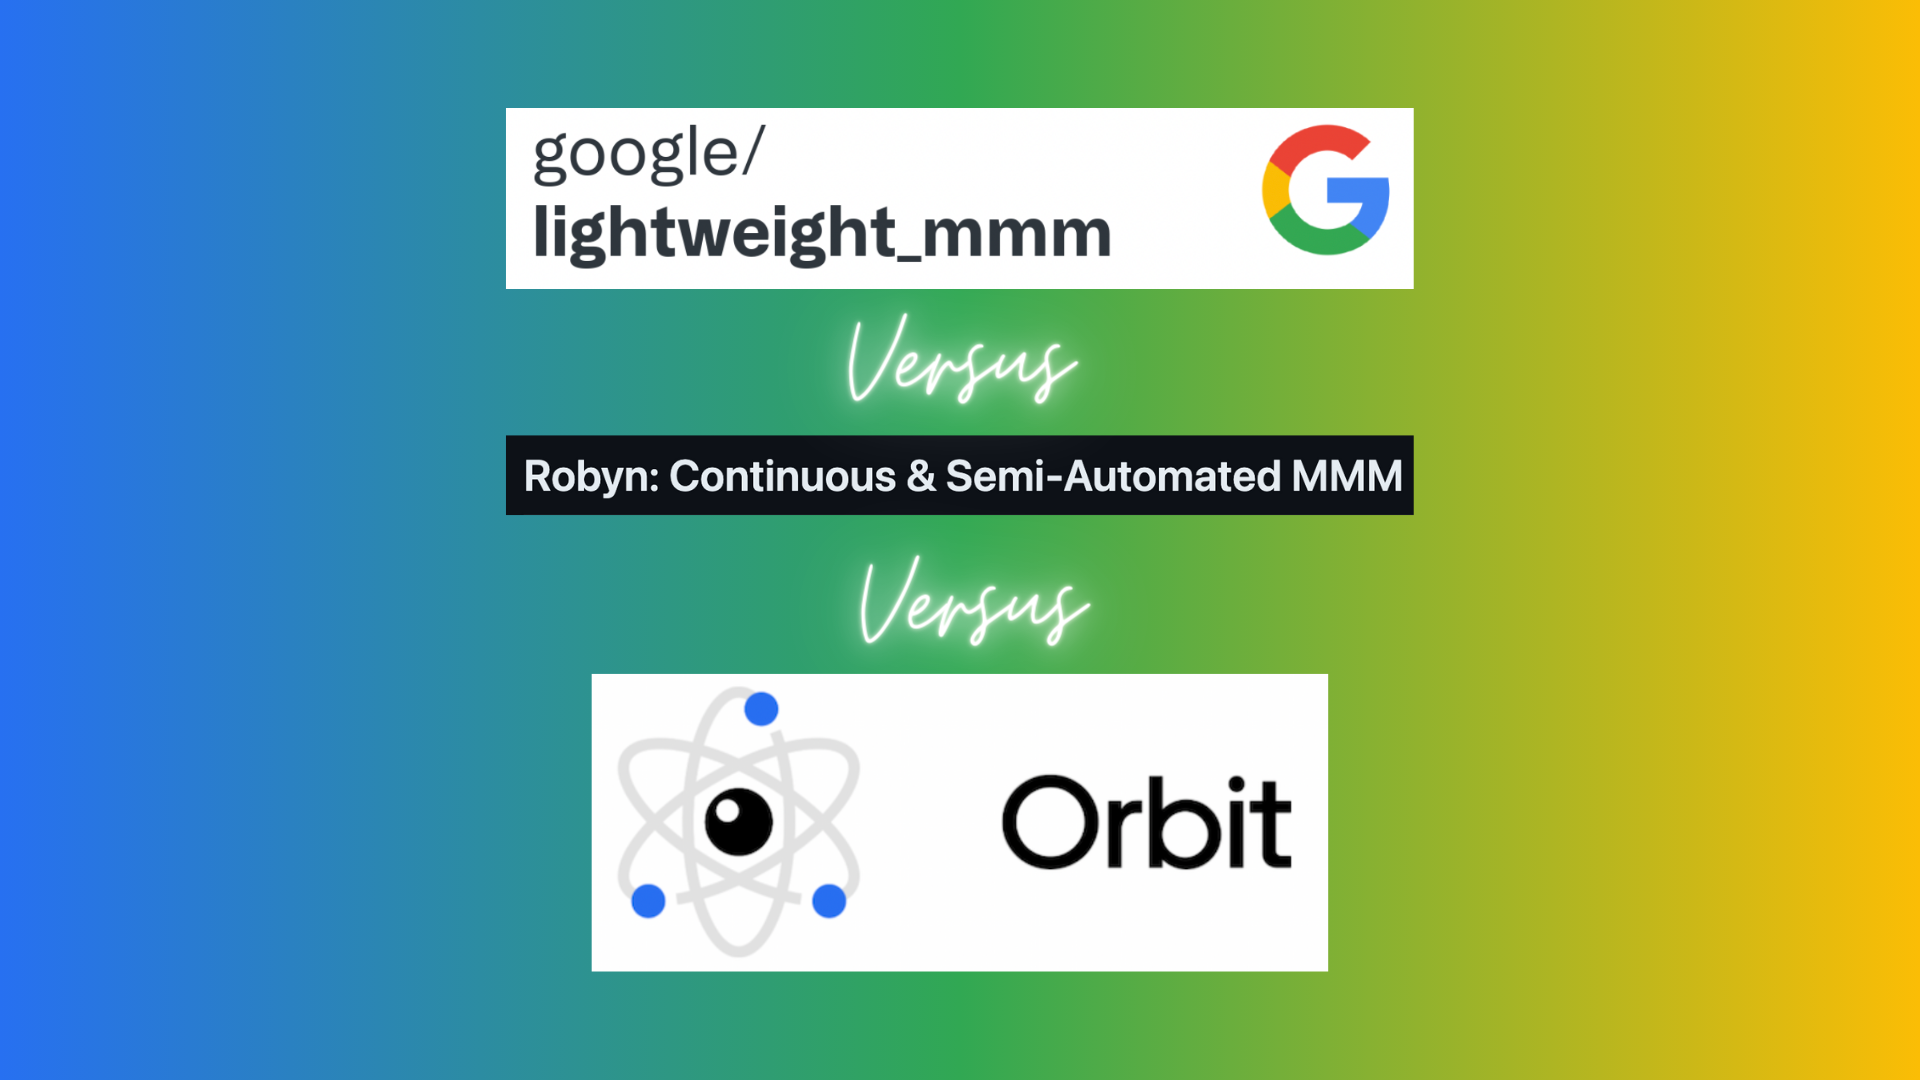 LightweightMMM vs. Robyn vs. Orbit with logos on a blended blue, green and yellow background. 